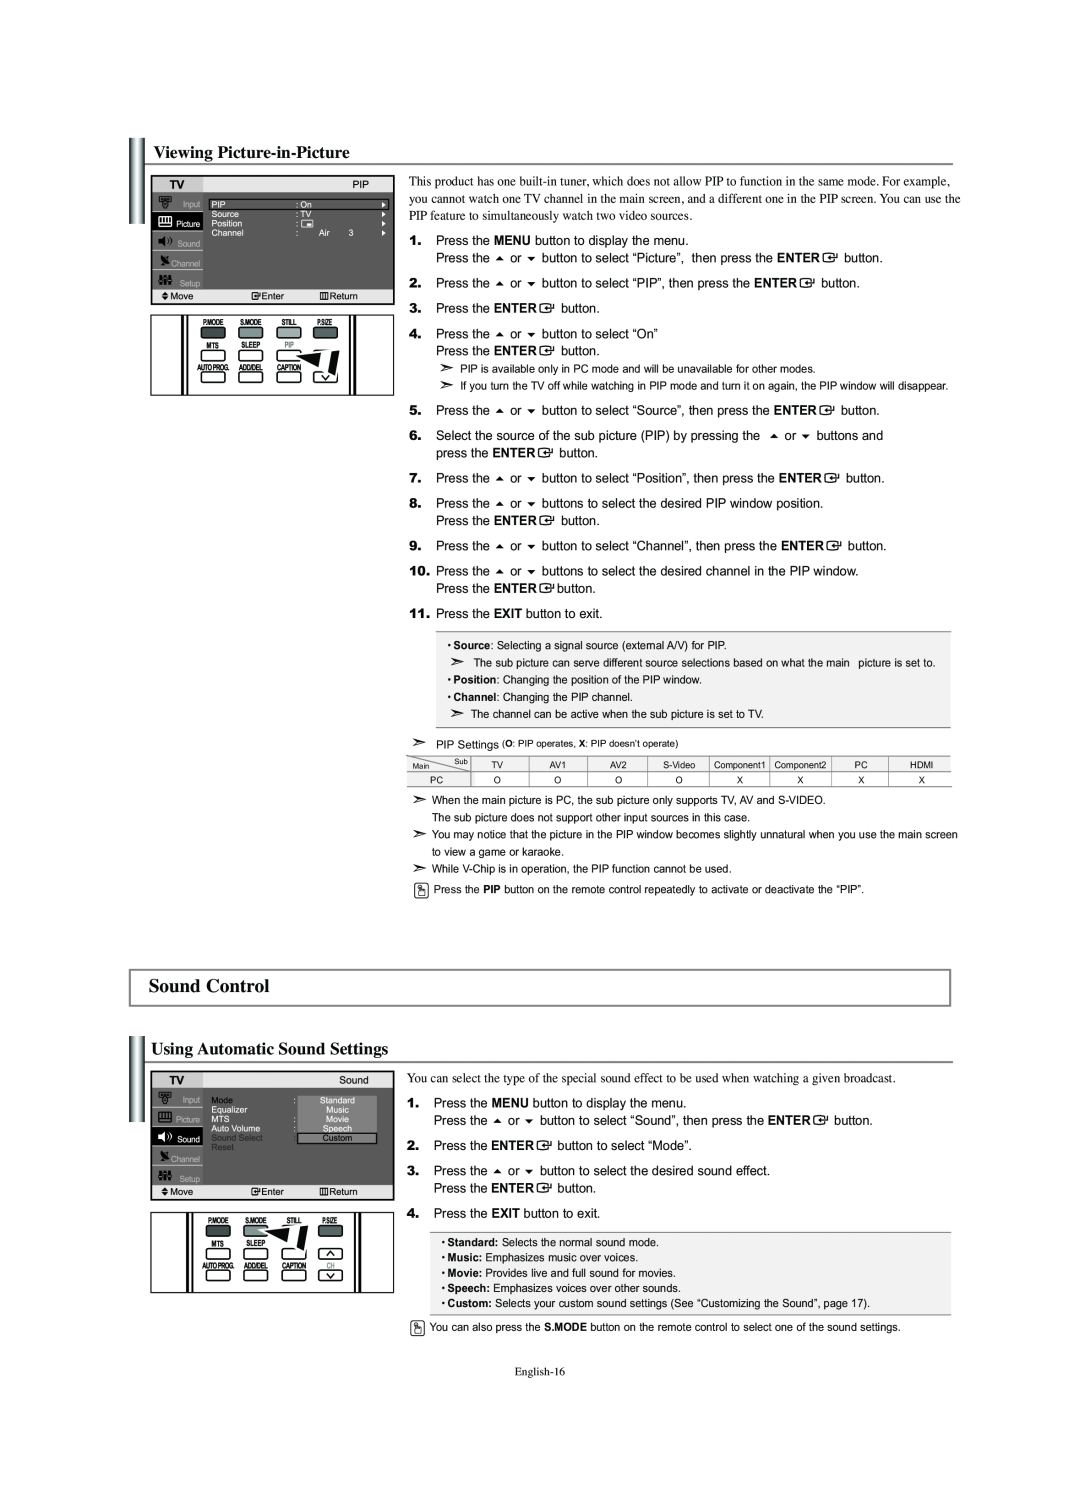 Samsung LN-S2341W manual Sound Control, Viewing Picture-in-Picture, Using Automatic Sound Settings 